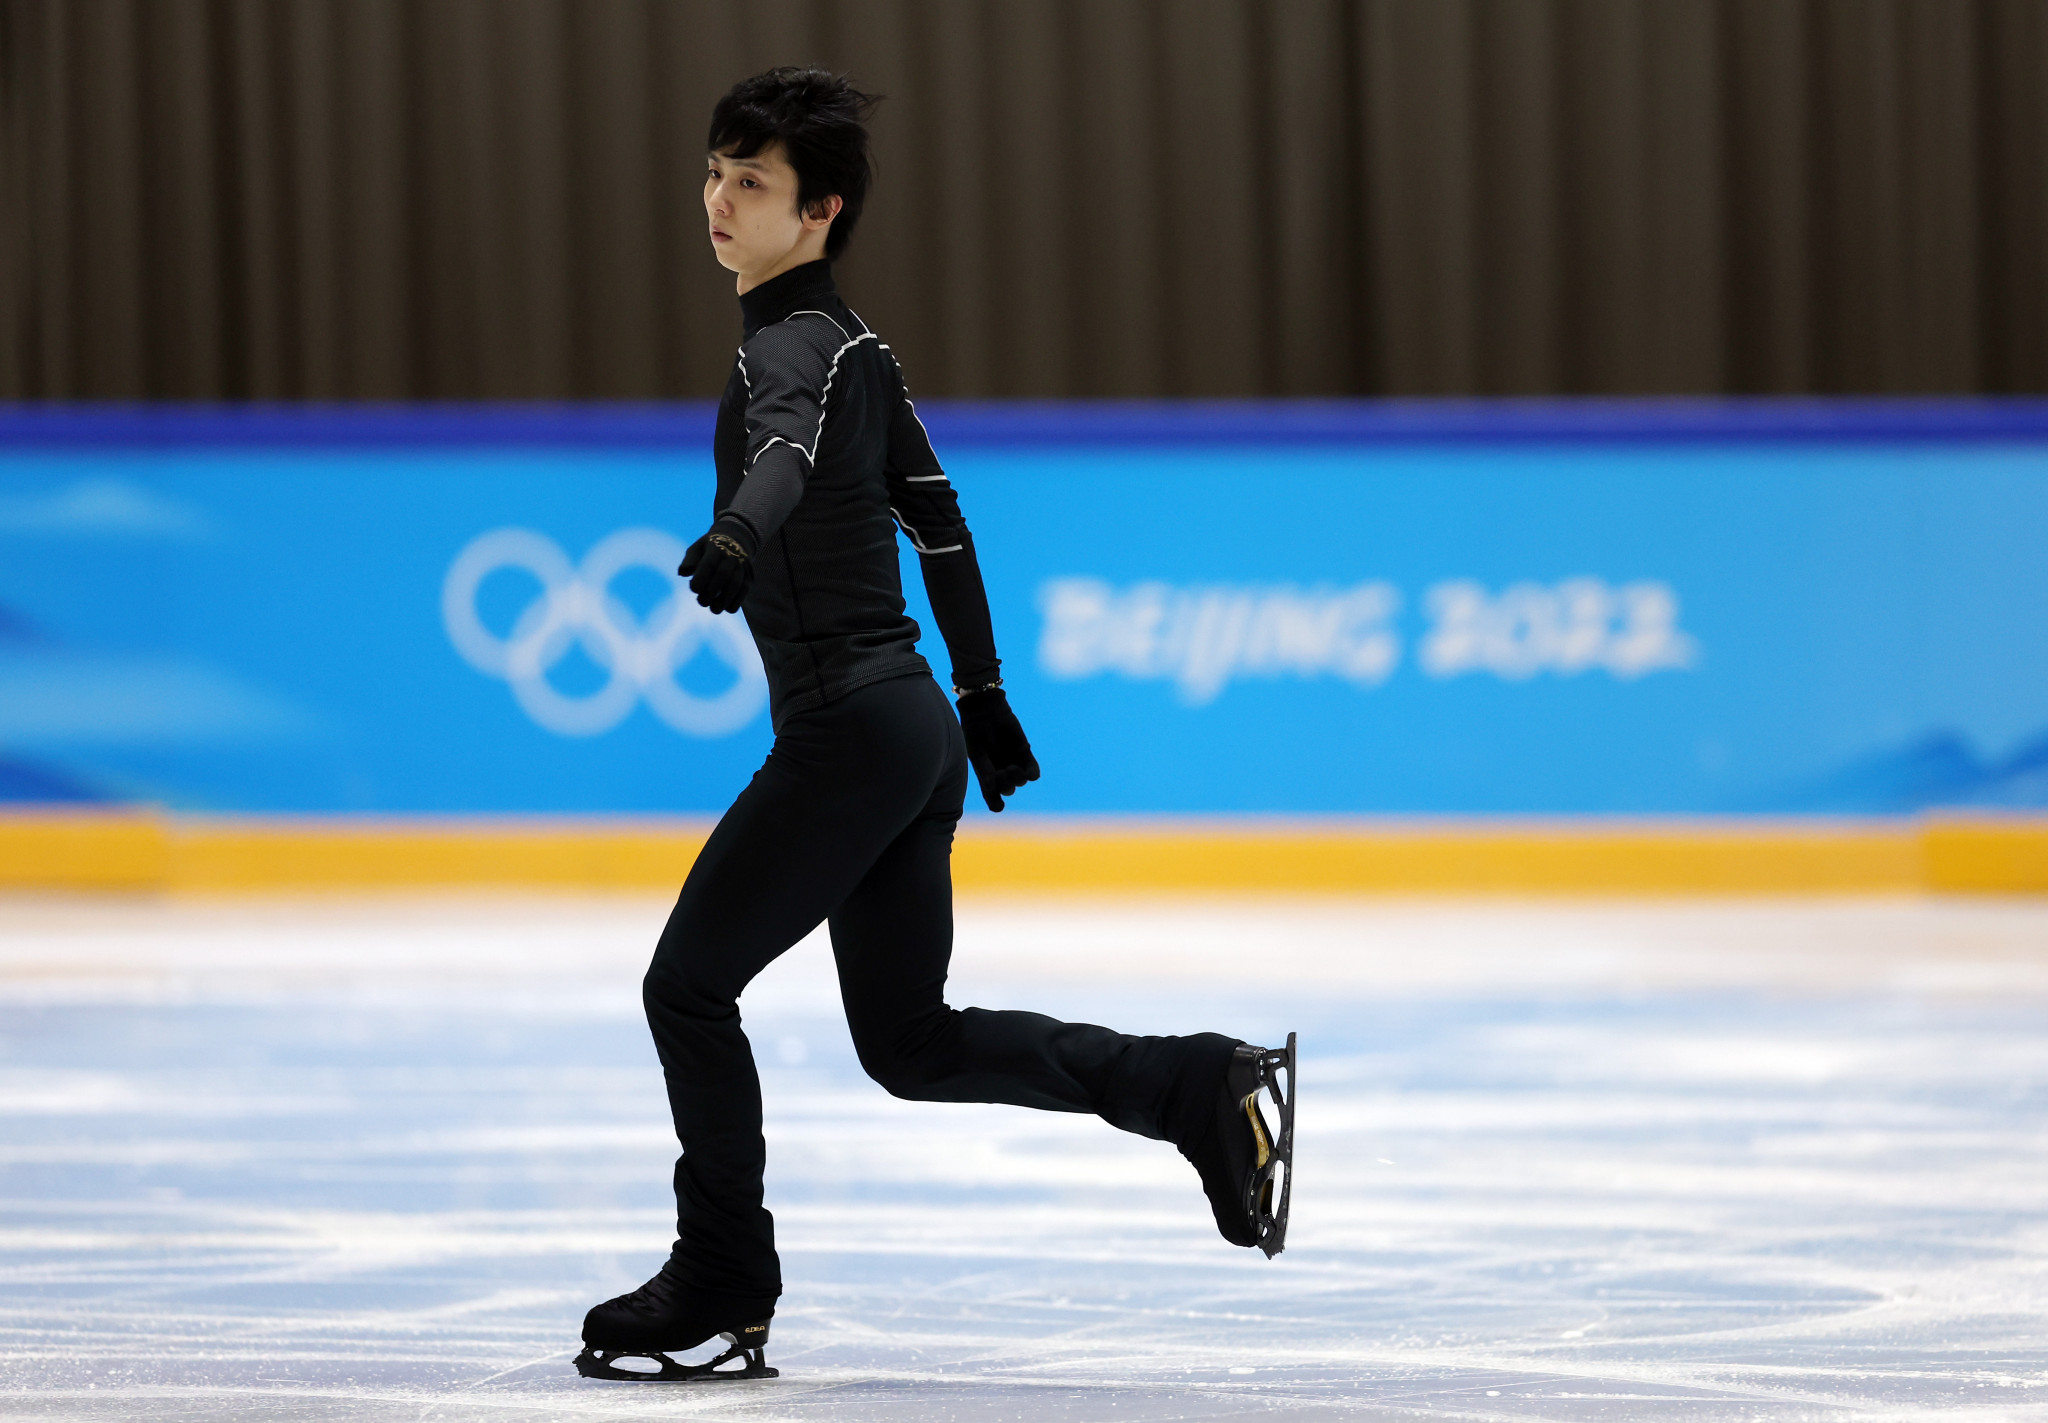 Japanese figure skating star Hanyu to miss World Championships with ankle injury